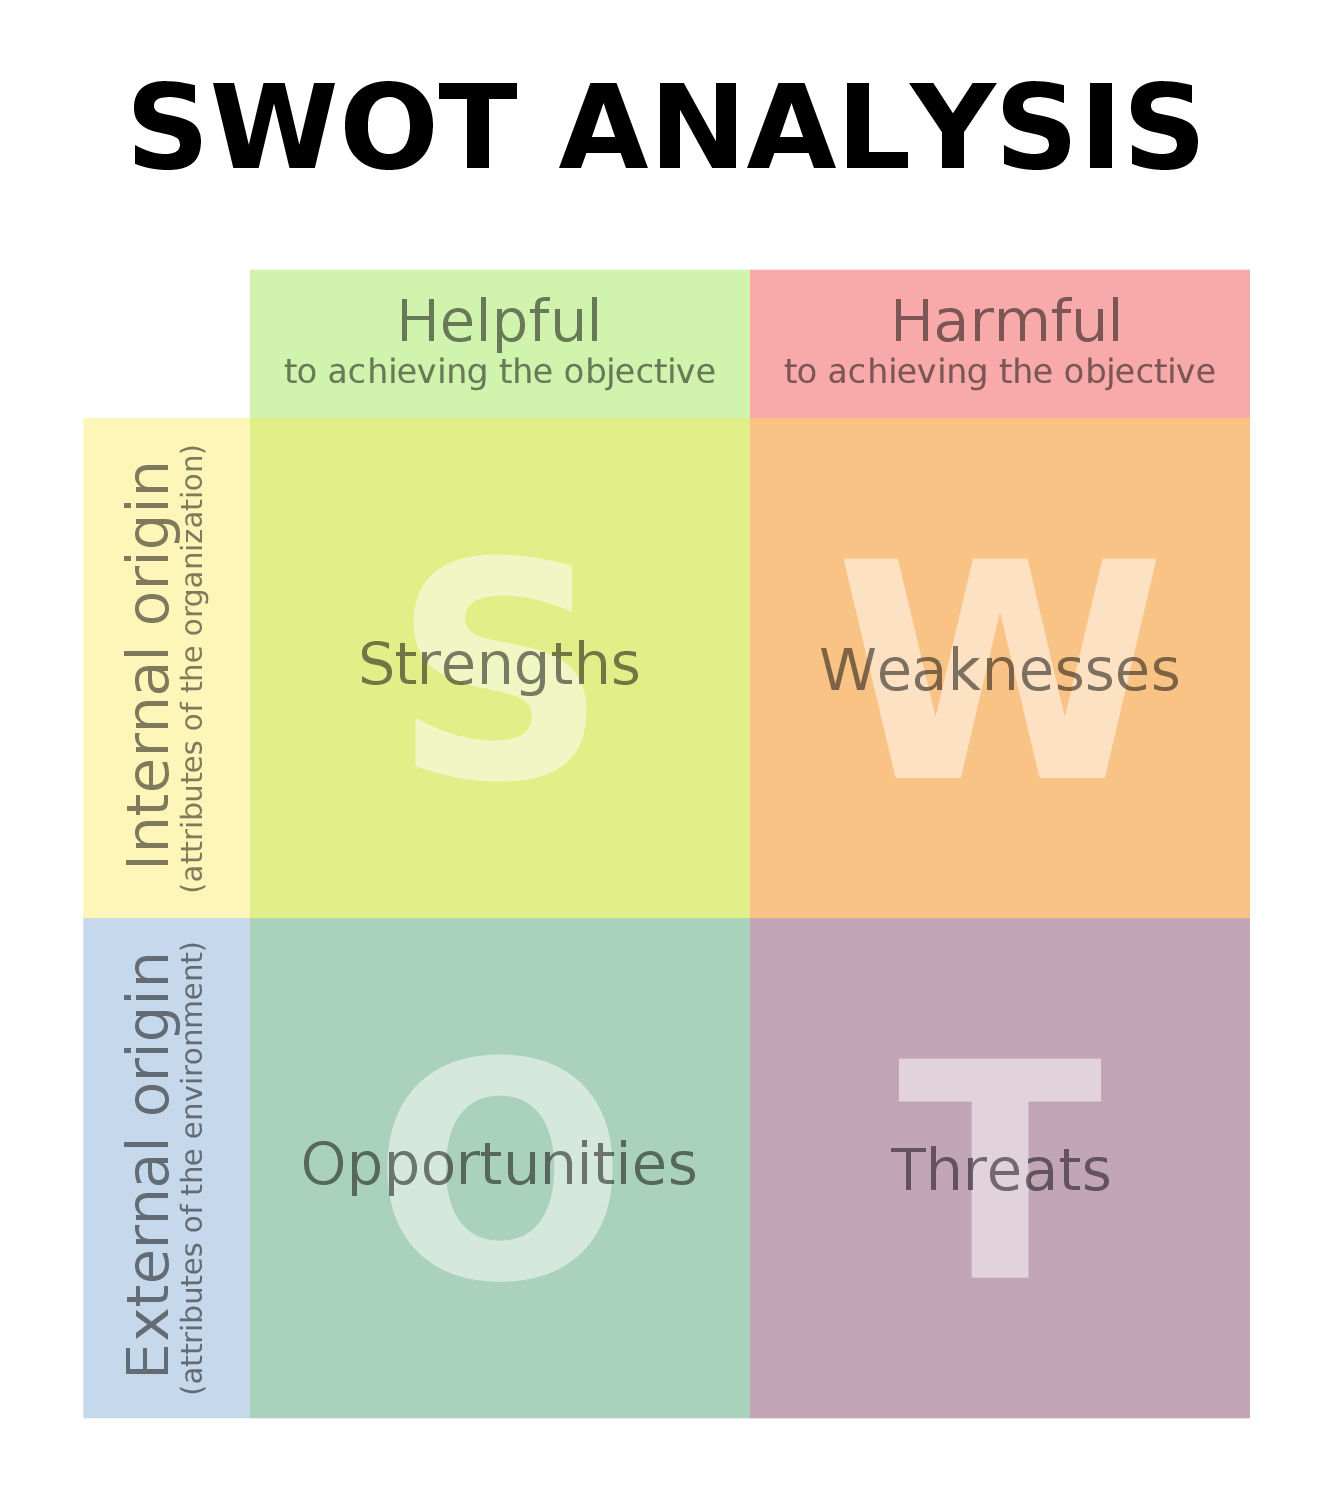 Swot Analysis How To Conduct A Proper One Stevebizblog